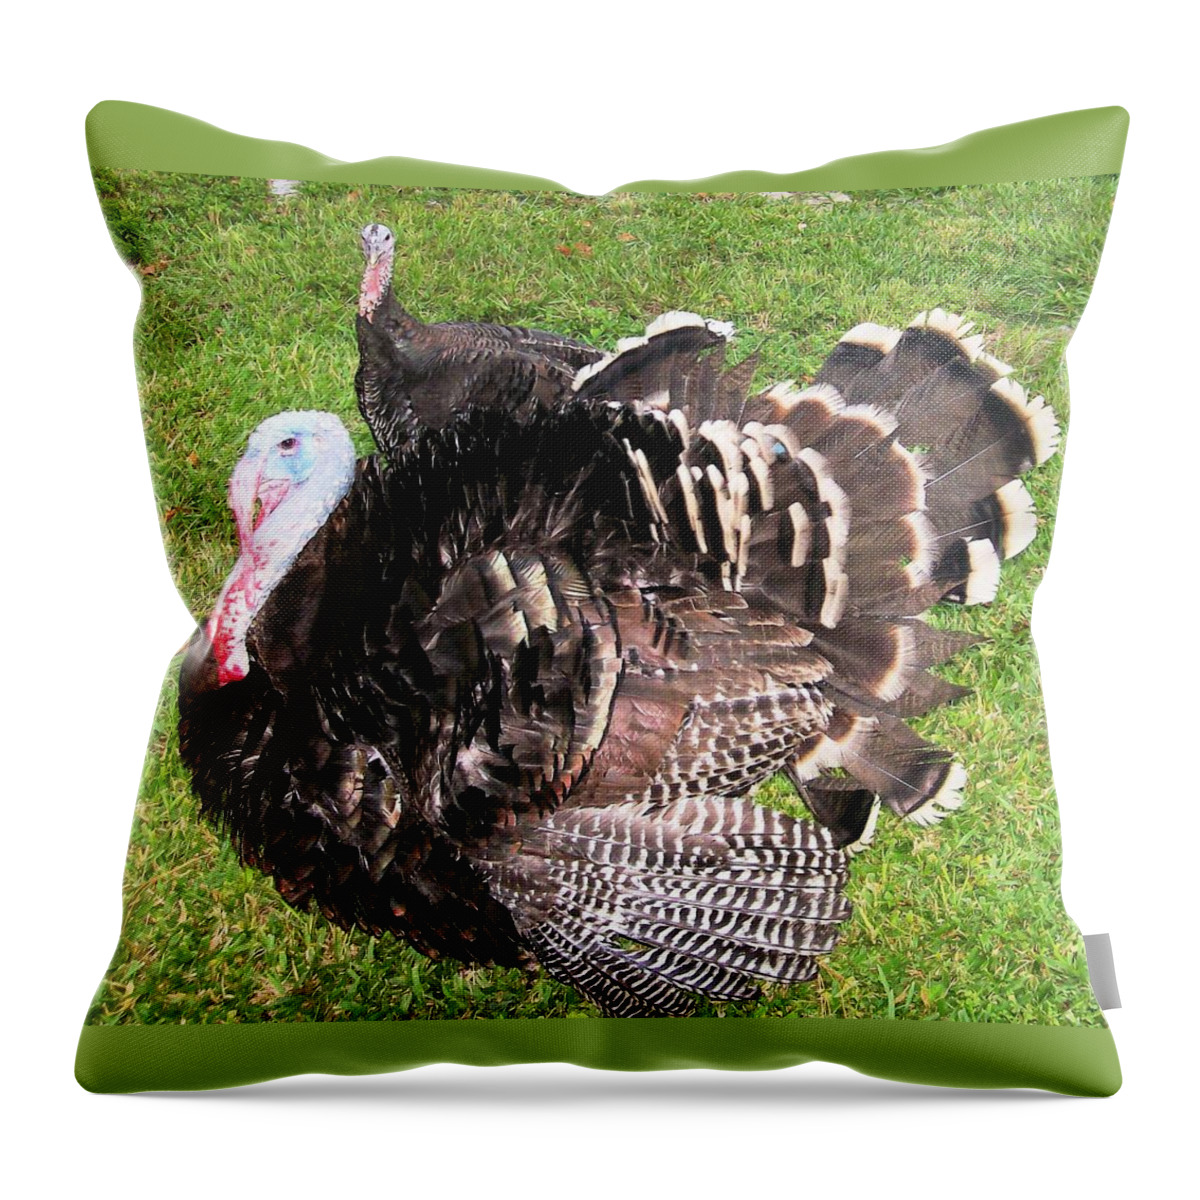 Beautiful Pair Of #turkeys In Our Yard. They Were A Little Lost And Confused So I Grabbed The Camera And Took Advantage. :)#bright #blue #red Black And White #feathers Throw Pillow featuring the photograph Lost City Turkeys by Belinda Lee